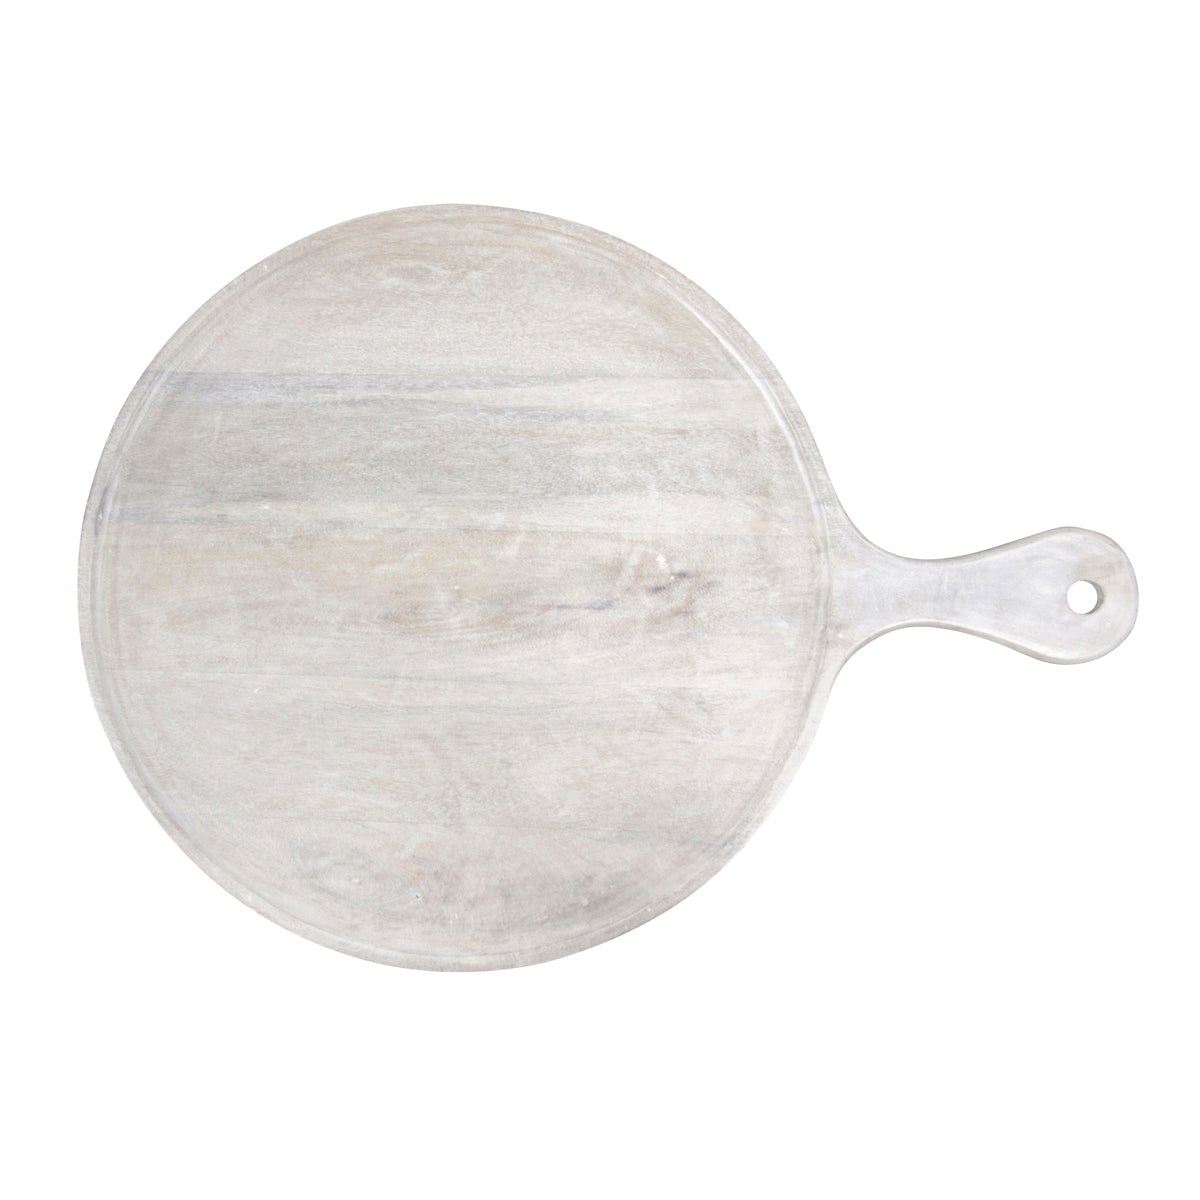 '04837 Chef Inox Mangowood Round Serving Board with Handle White 570x20mm Tomkin Australia Hospitality Supplies